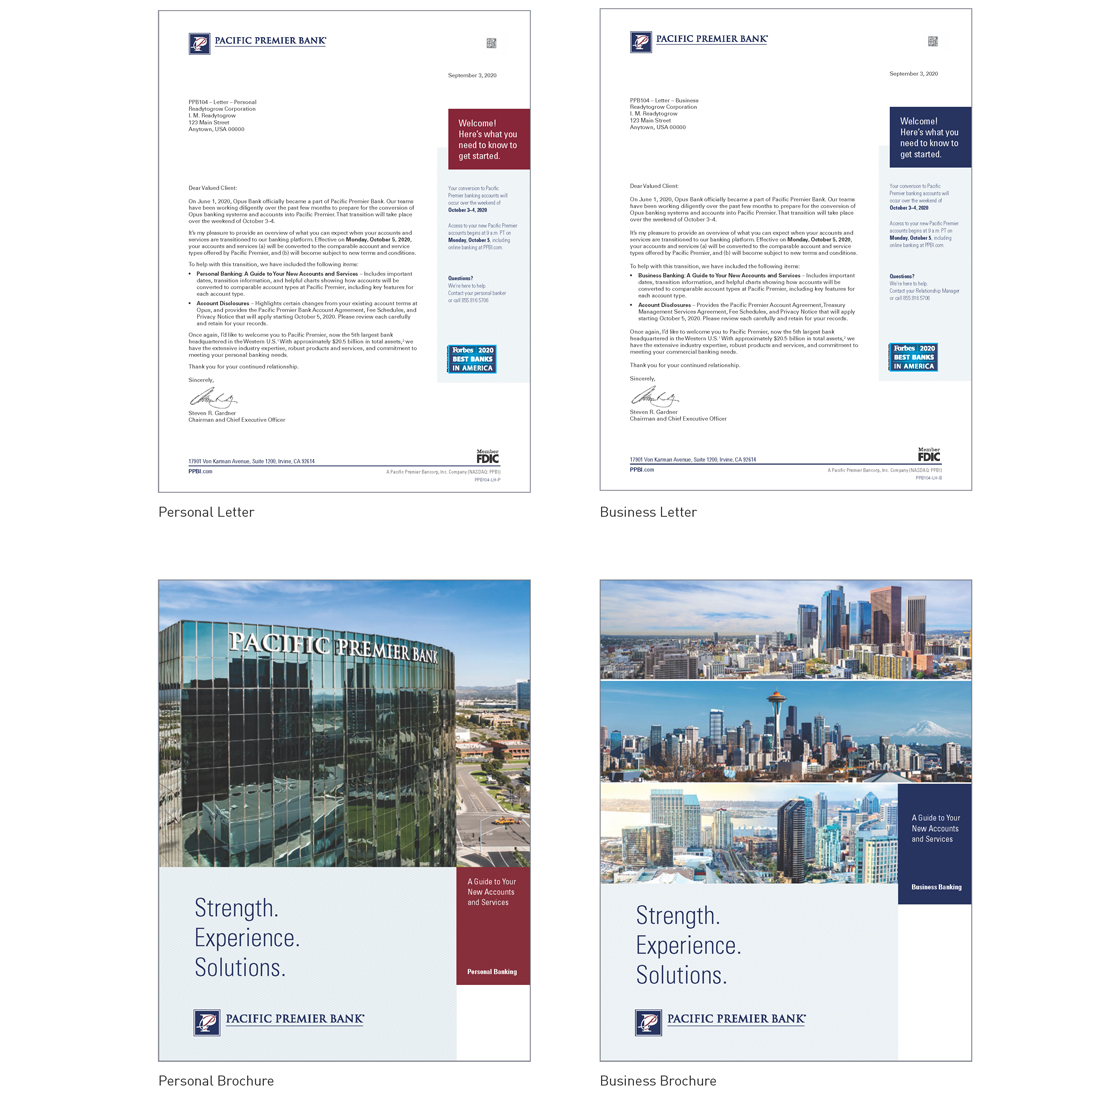 Pacific Premier Bank main conversion personal brochure, personal letter, business brochure, and business letter